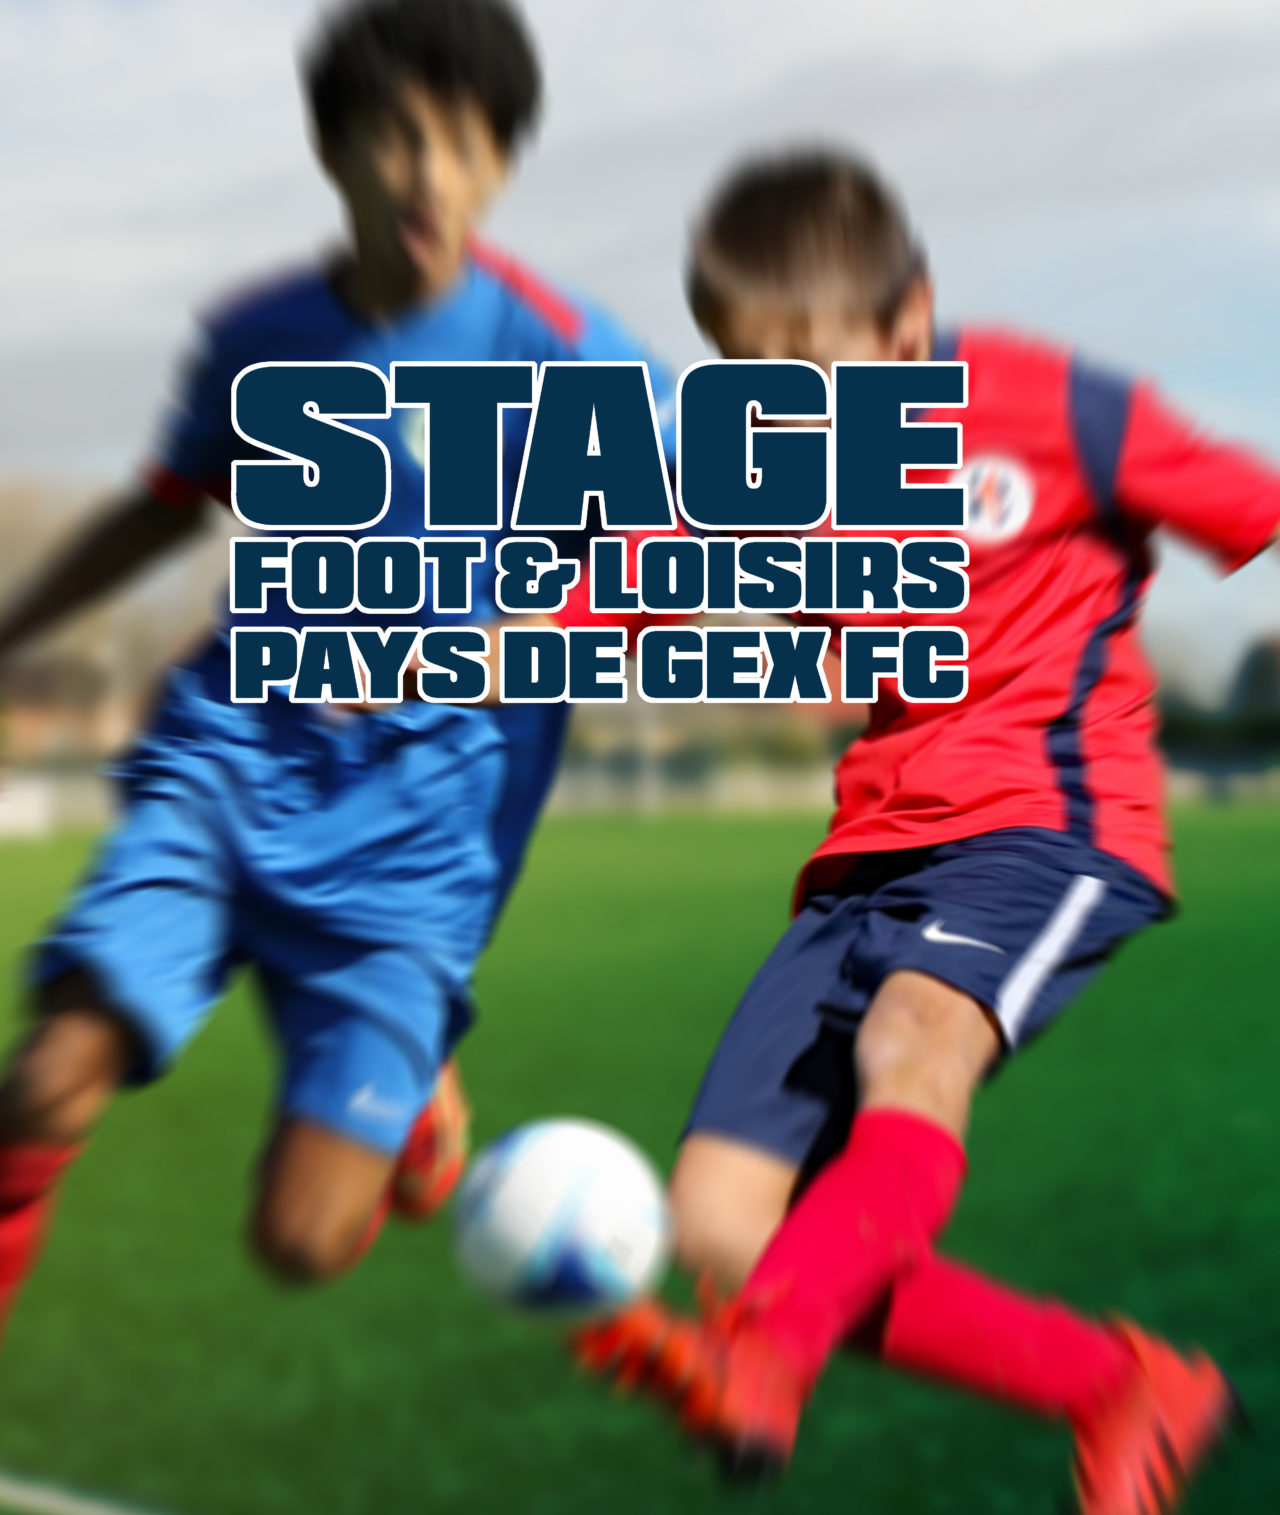 https://paysdegexfc.com/wp-content/uploads/2023/03/STAGES-FOOT-PGFC-1280x1515.jpg